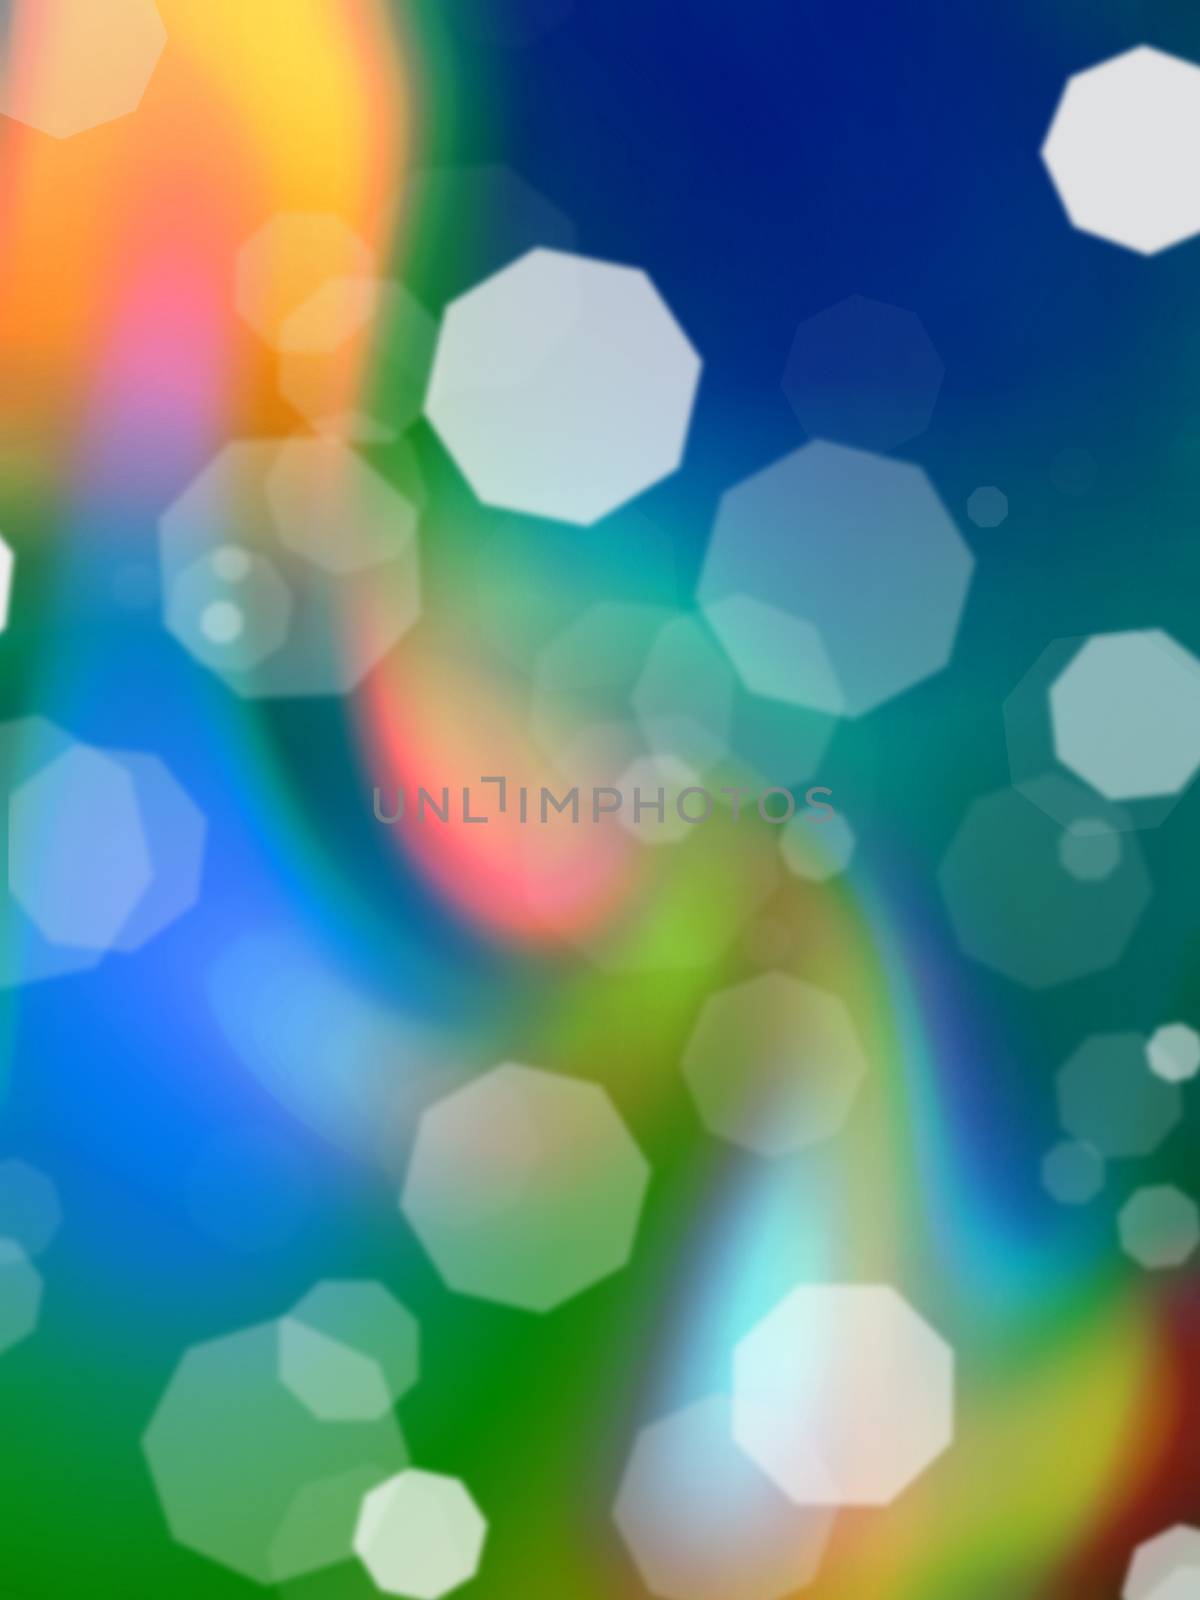 Abstract colorful blured background